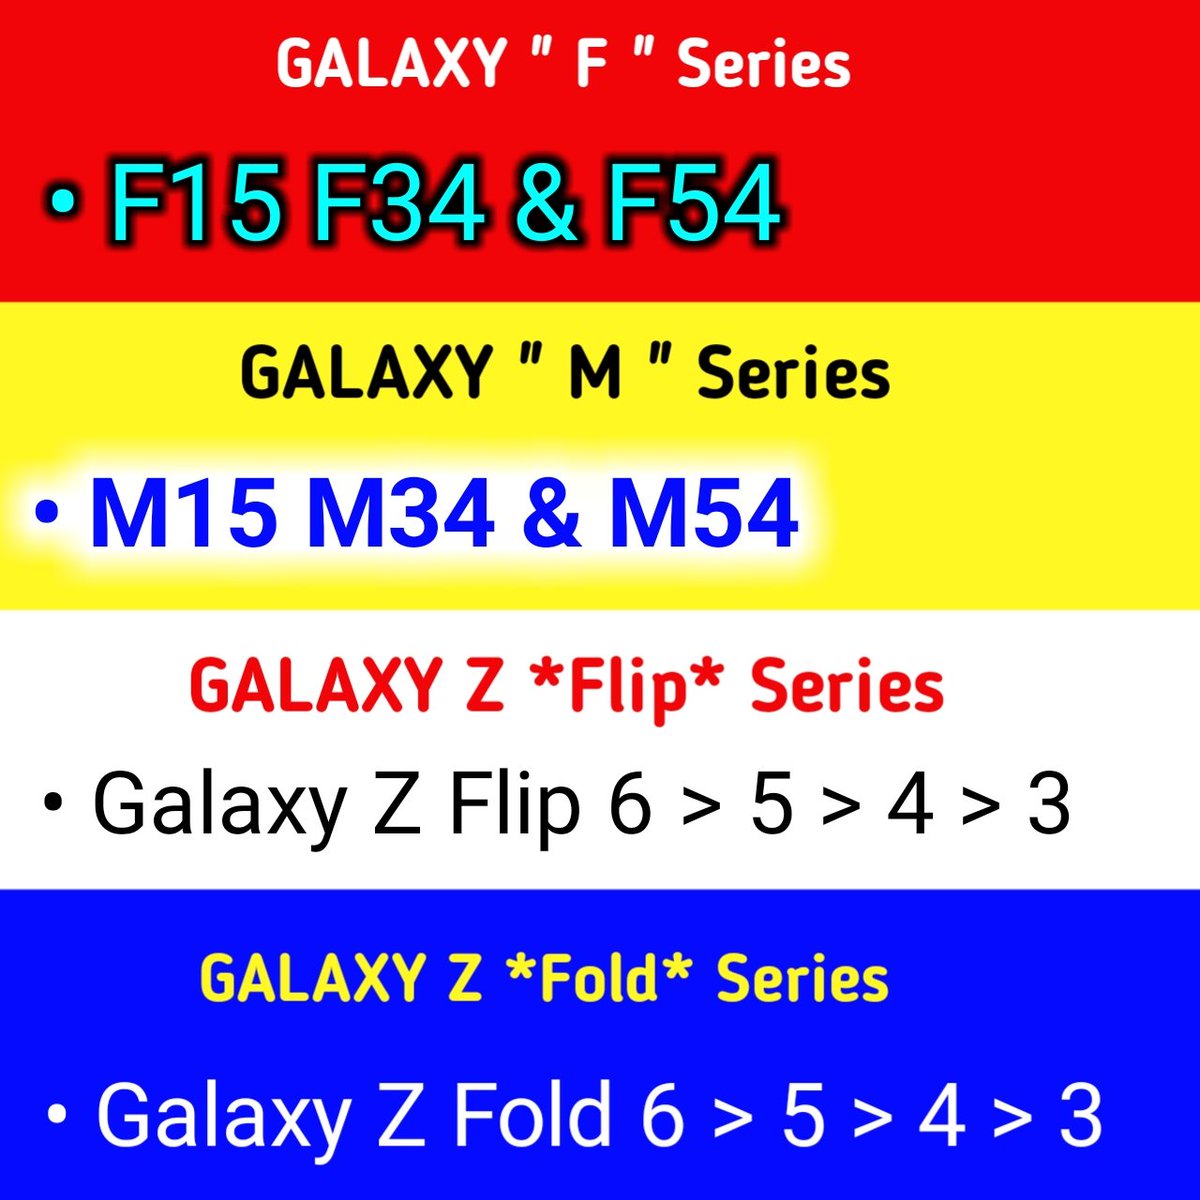 Android 15 based OneUI 7 Eligible Galaxy Smartphones 

#Android15
#OneUI7
#Fold6 #Fold5 #Fold4 #Fold3
#Flip6 #Flip5 #Flip4 #Flip3
#GalaxyM54
#GalaxyM34
#GalaxyM15
#GalaxyF54
#GalaxyF34
#GalaxyF15